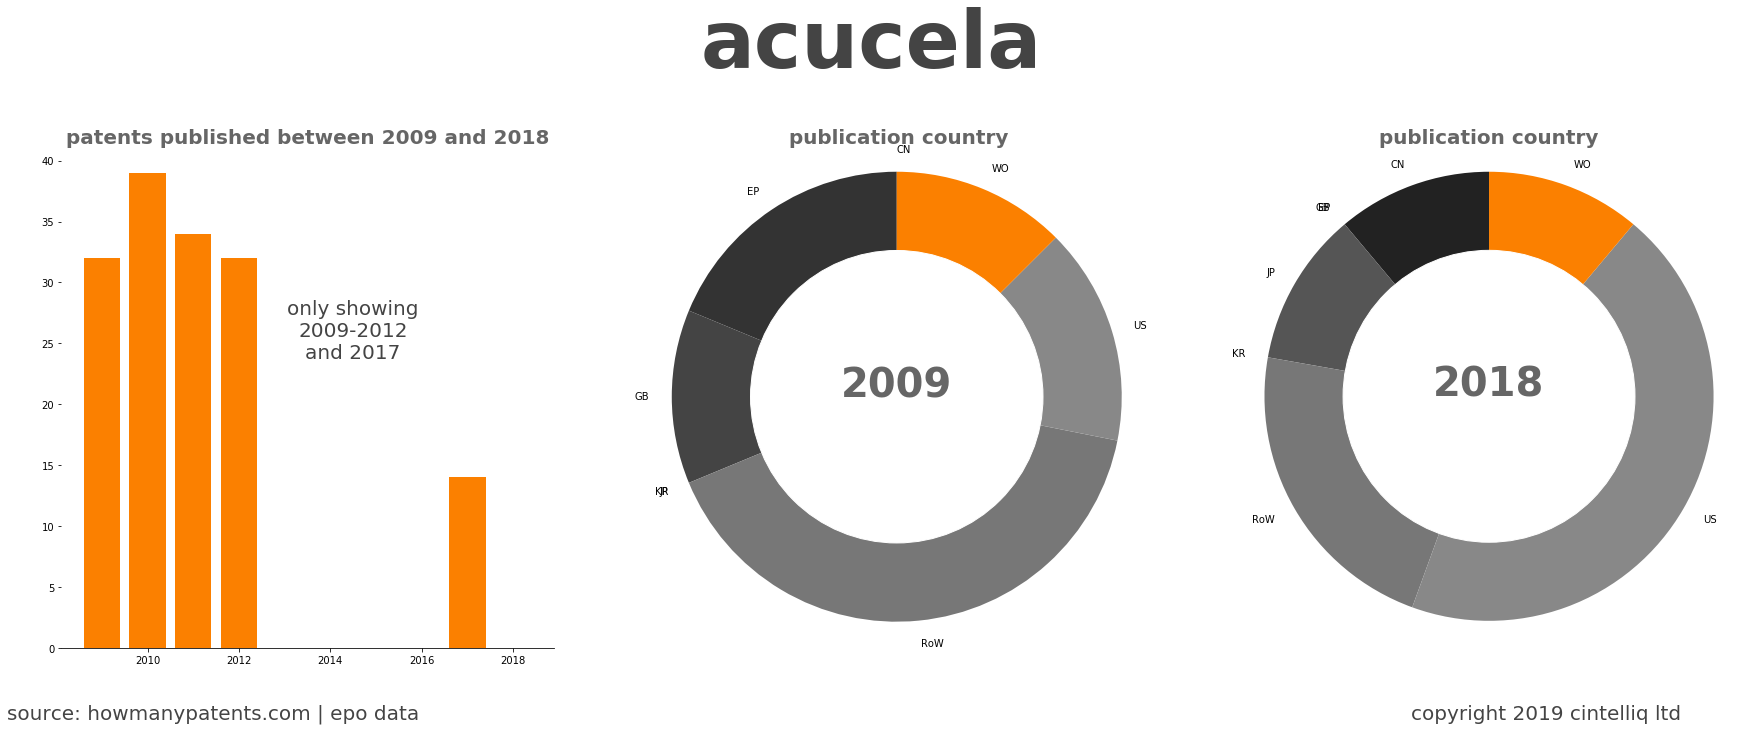 summary of patents for Acucela